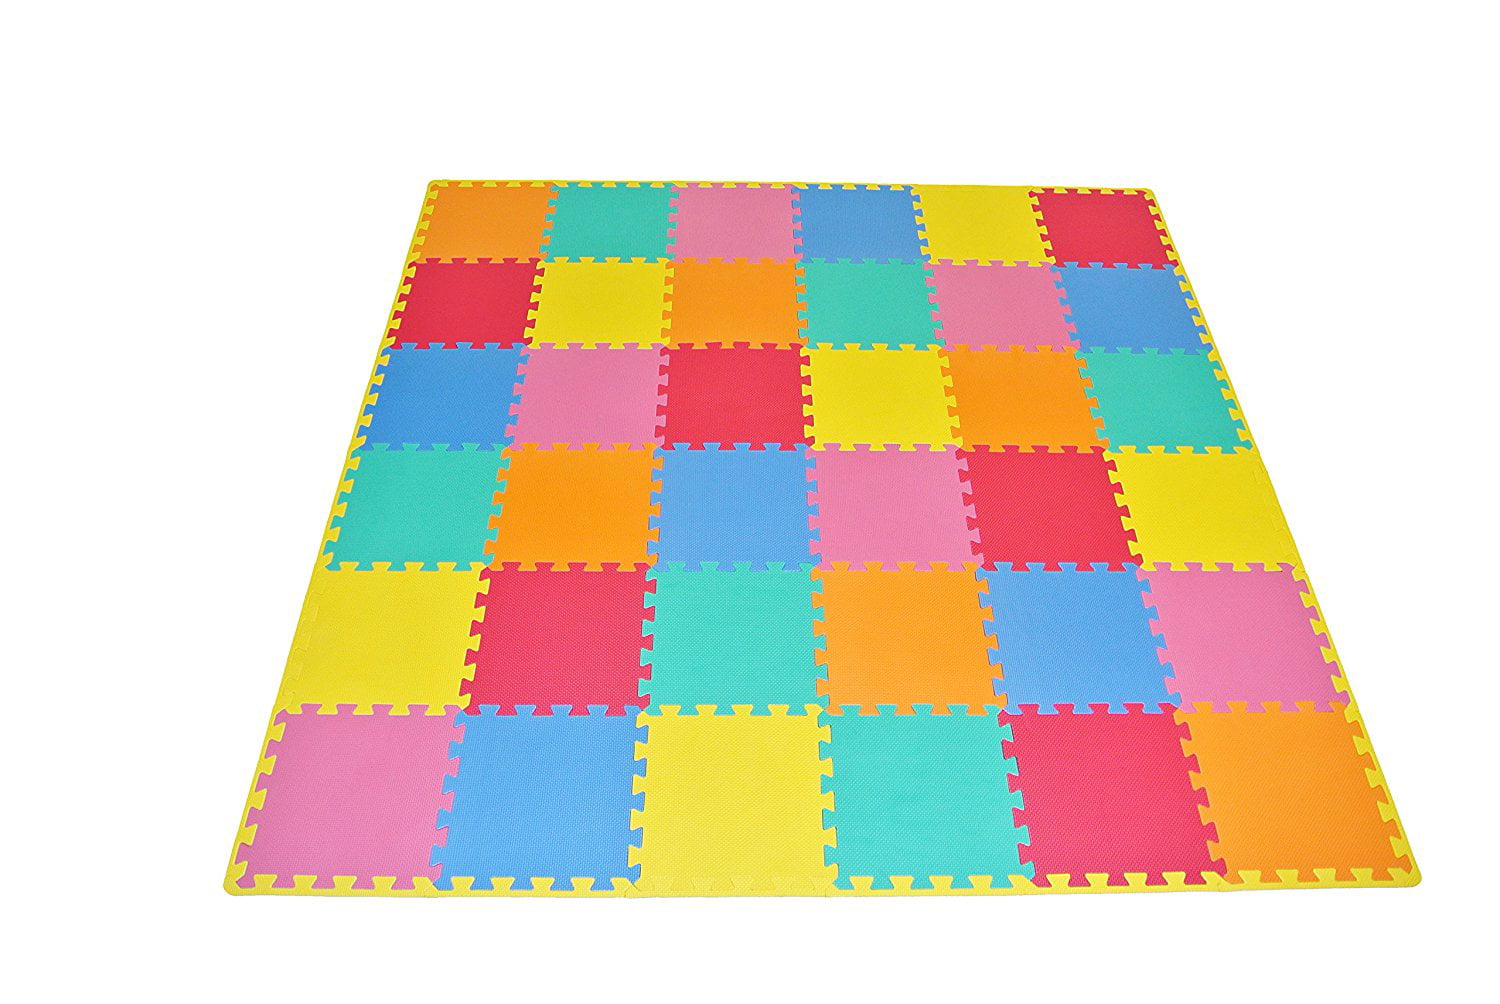 ProSource Kids Foam Puzzle Floor Play Mat with Solid Colors, 36 Tiles